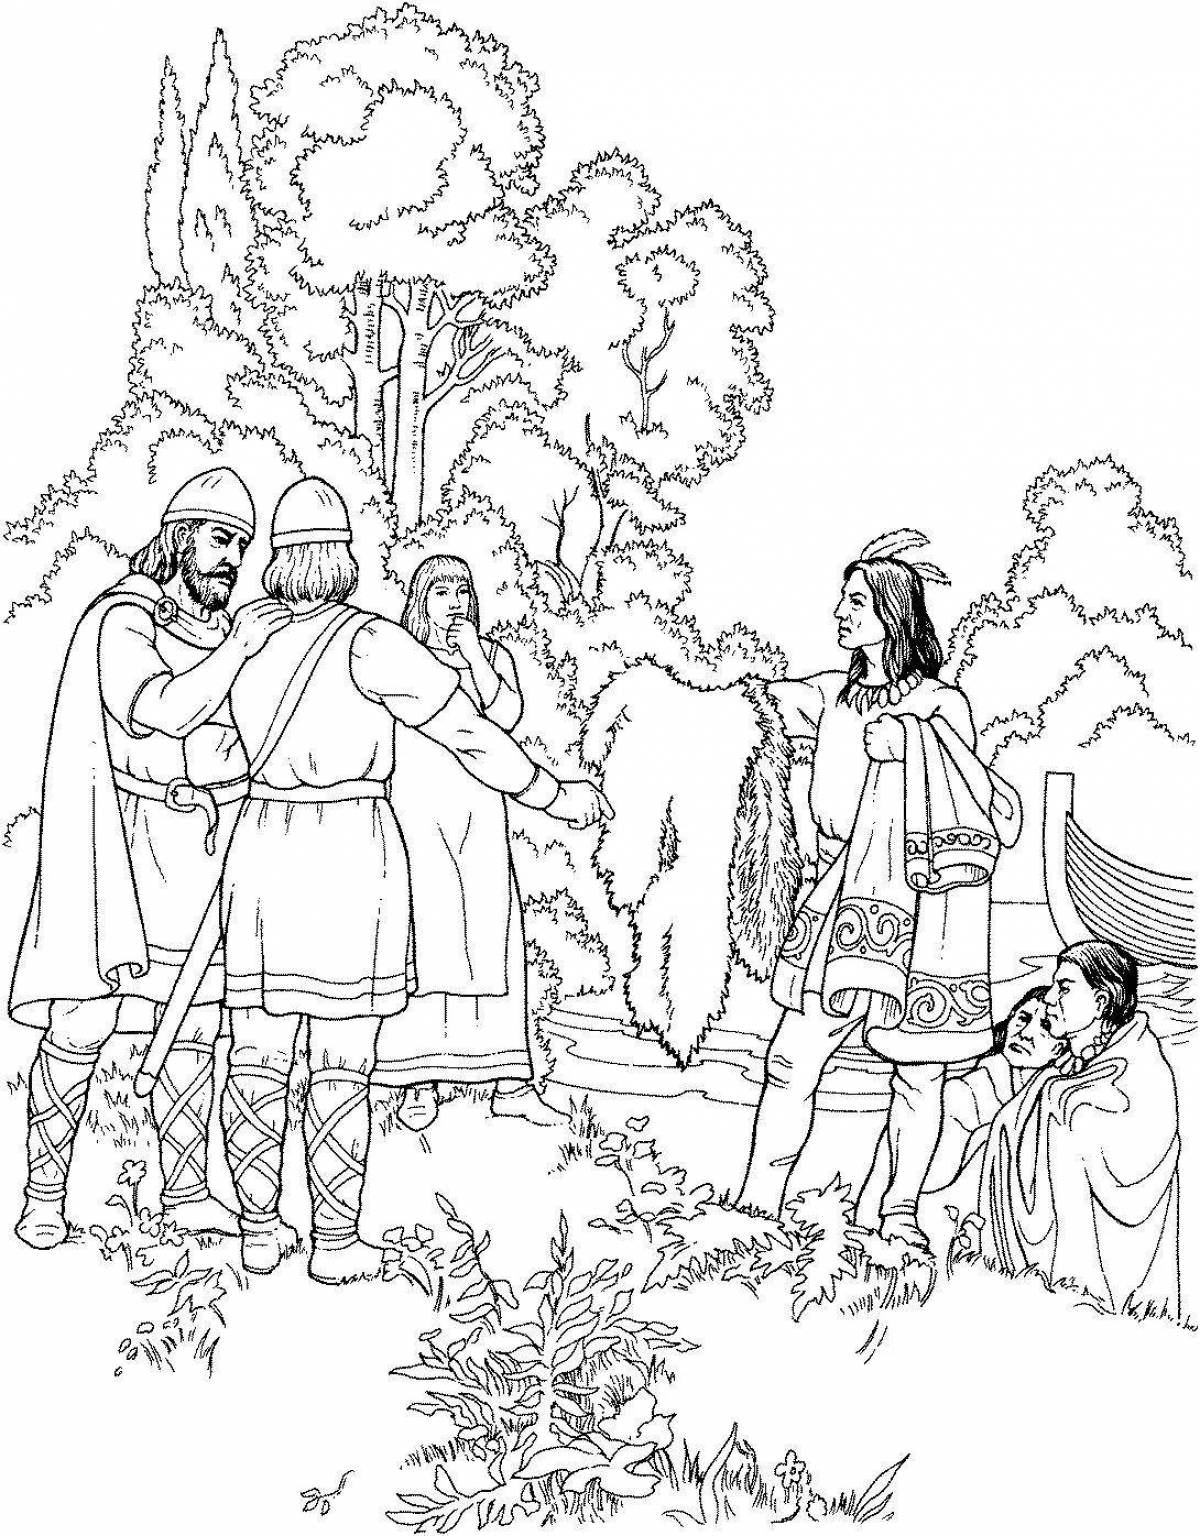 Amazing coloring book of ancient Slavic life